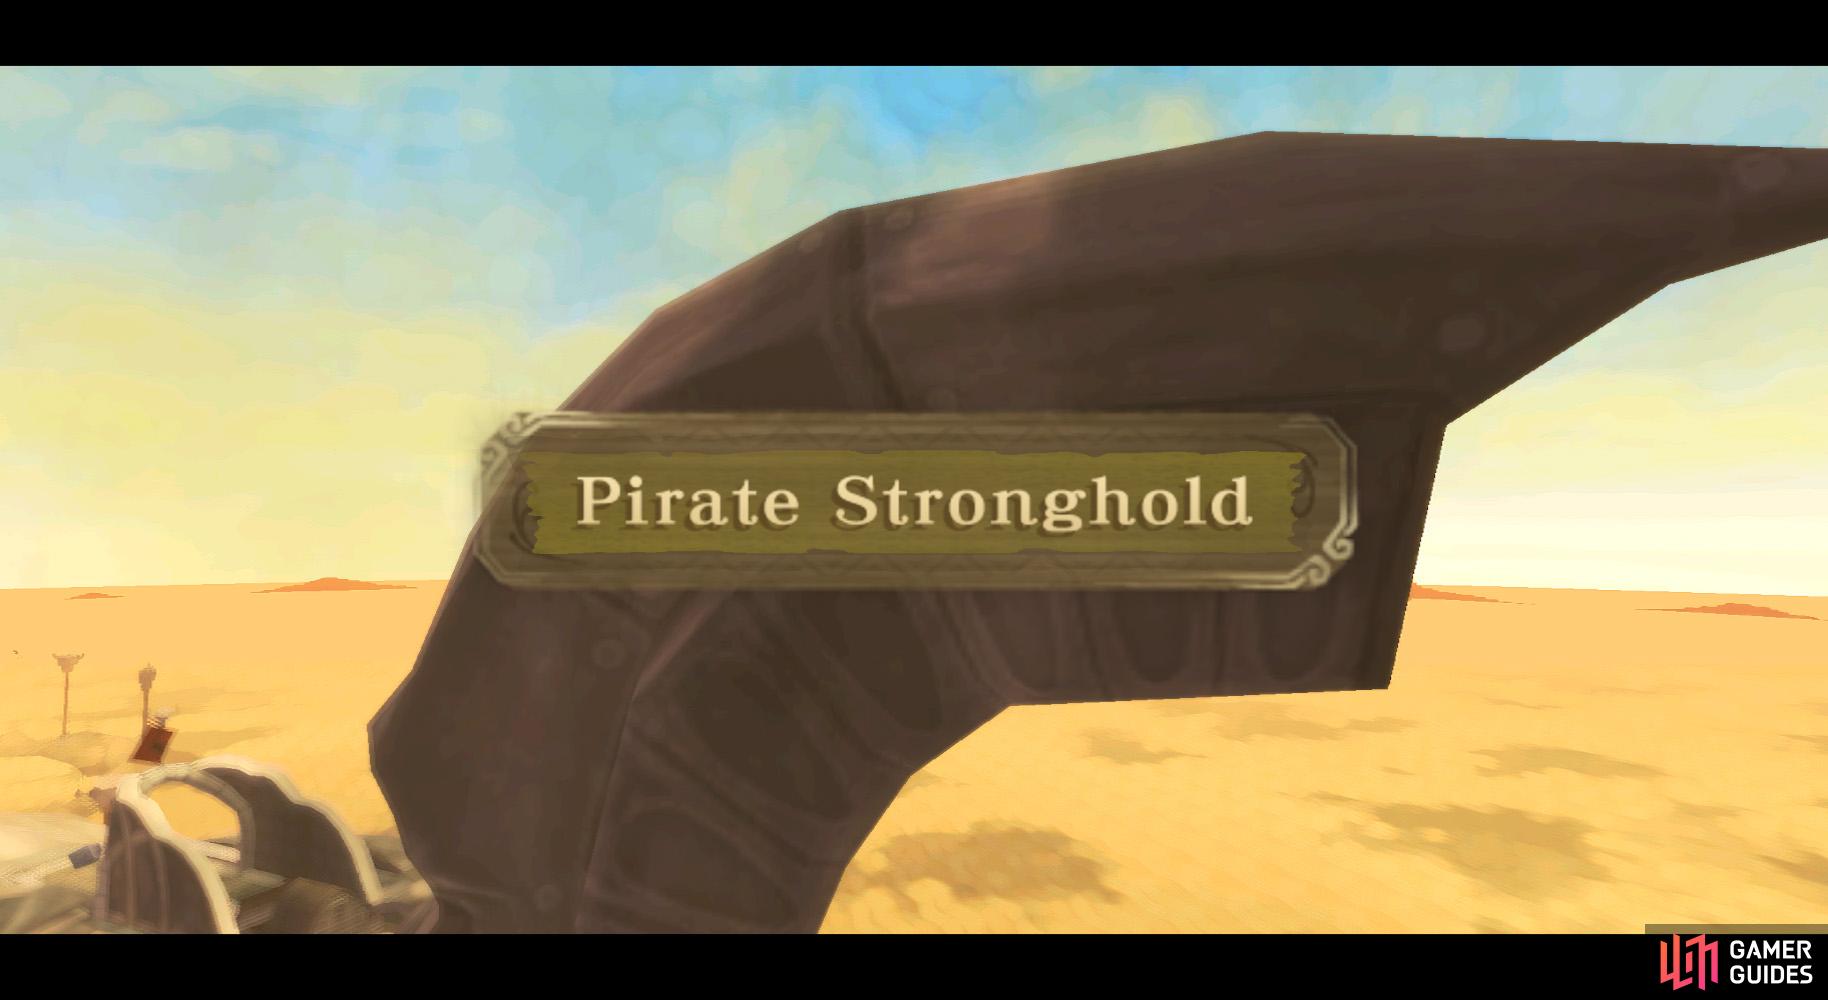 The Pirate Stronghold is an abandoned pirate base.